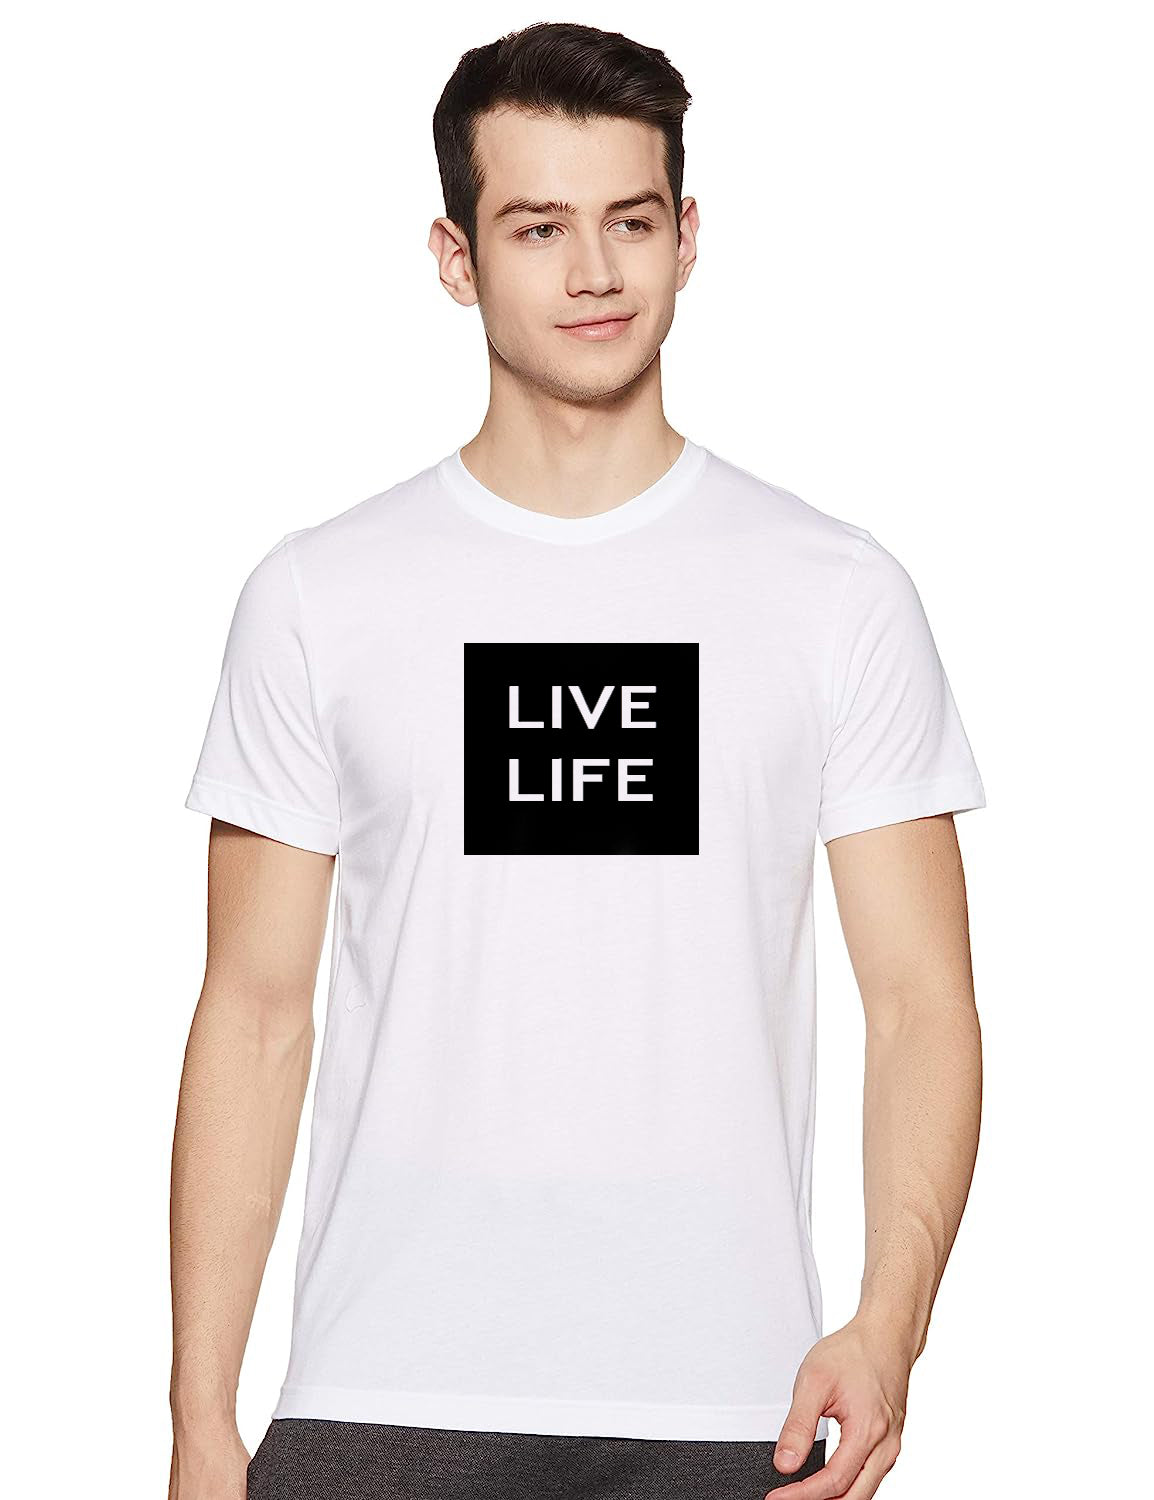 TheStyleO Cotton Half Sleeve Live Life Tees| T-Shirt